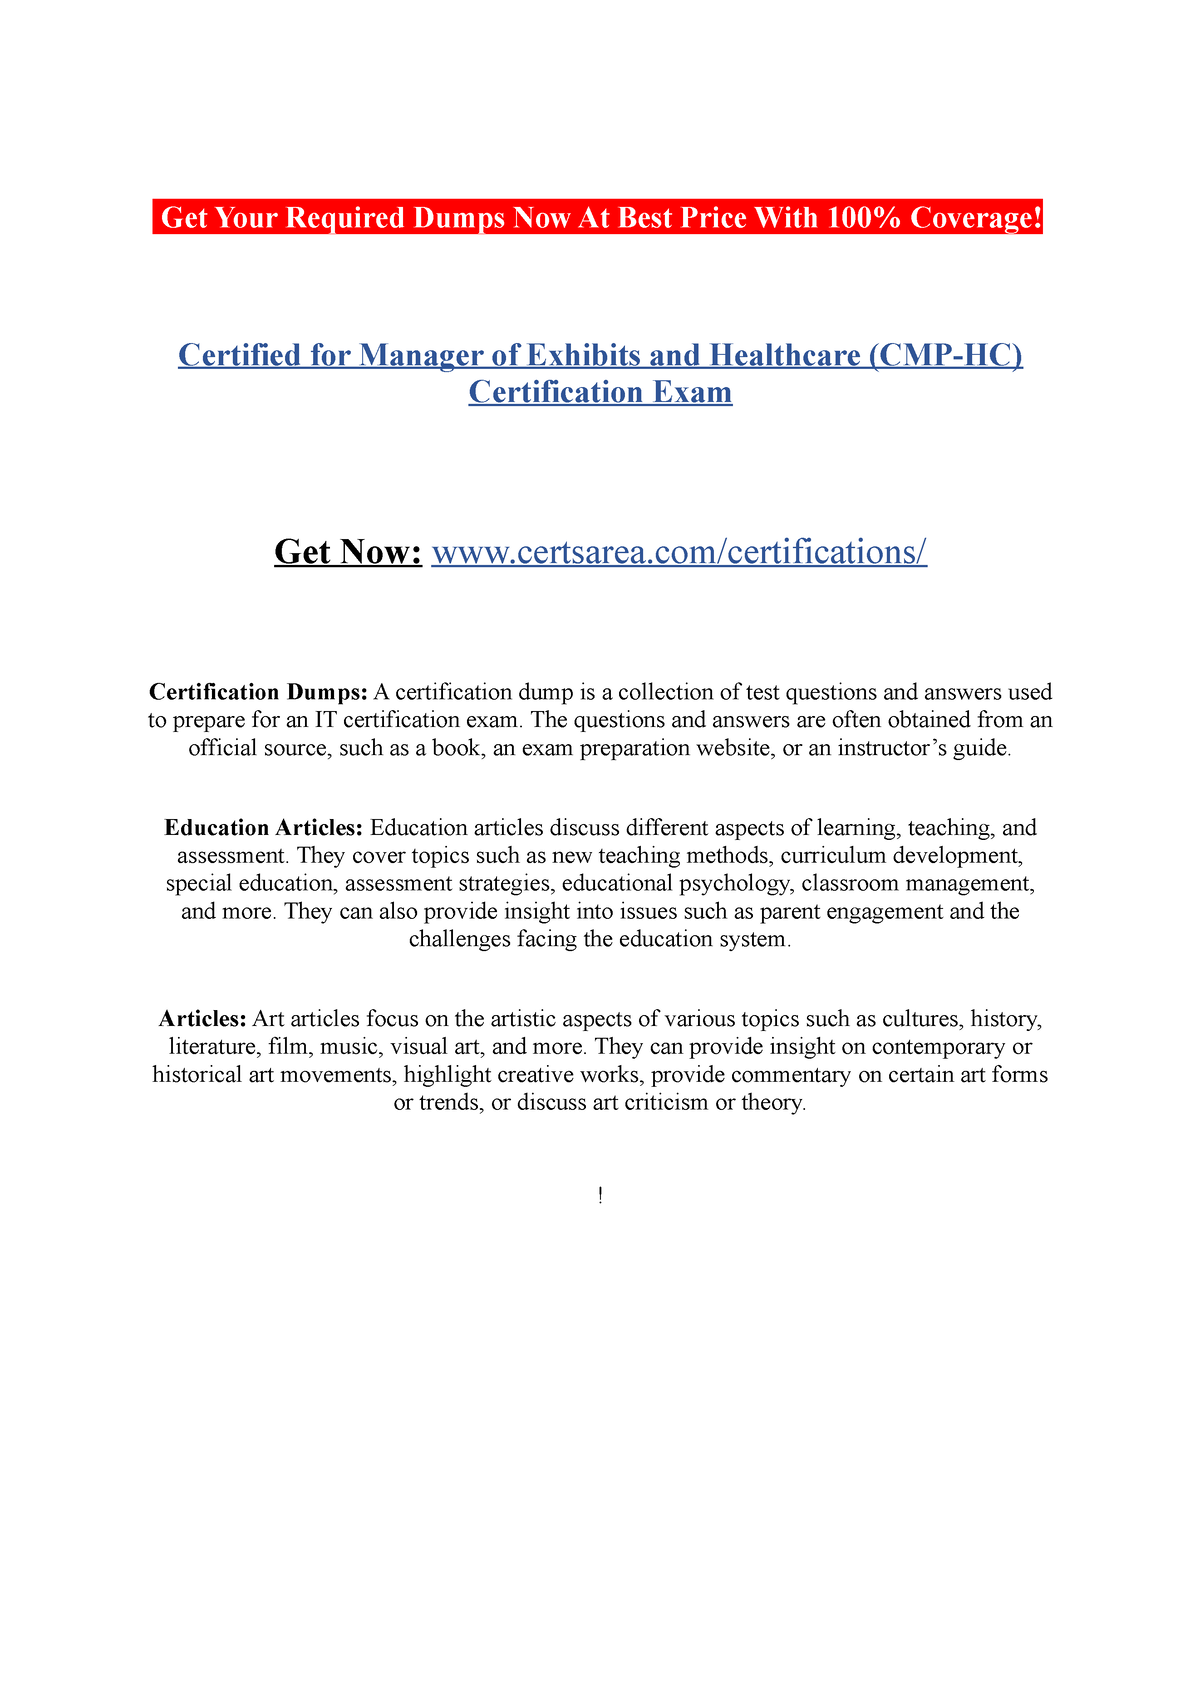 Certified for Manager of Exhibits and Healthcare (CMP HC) Certification